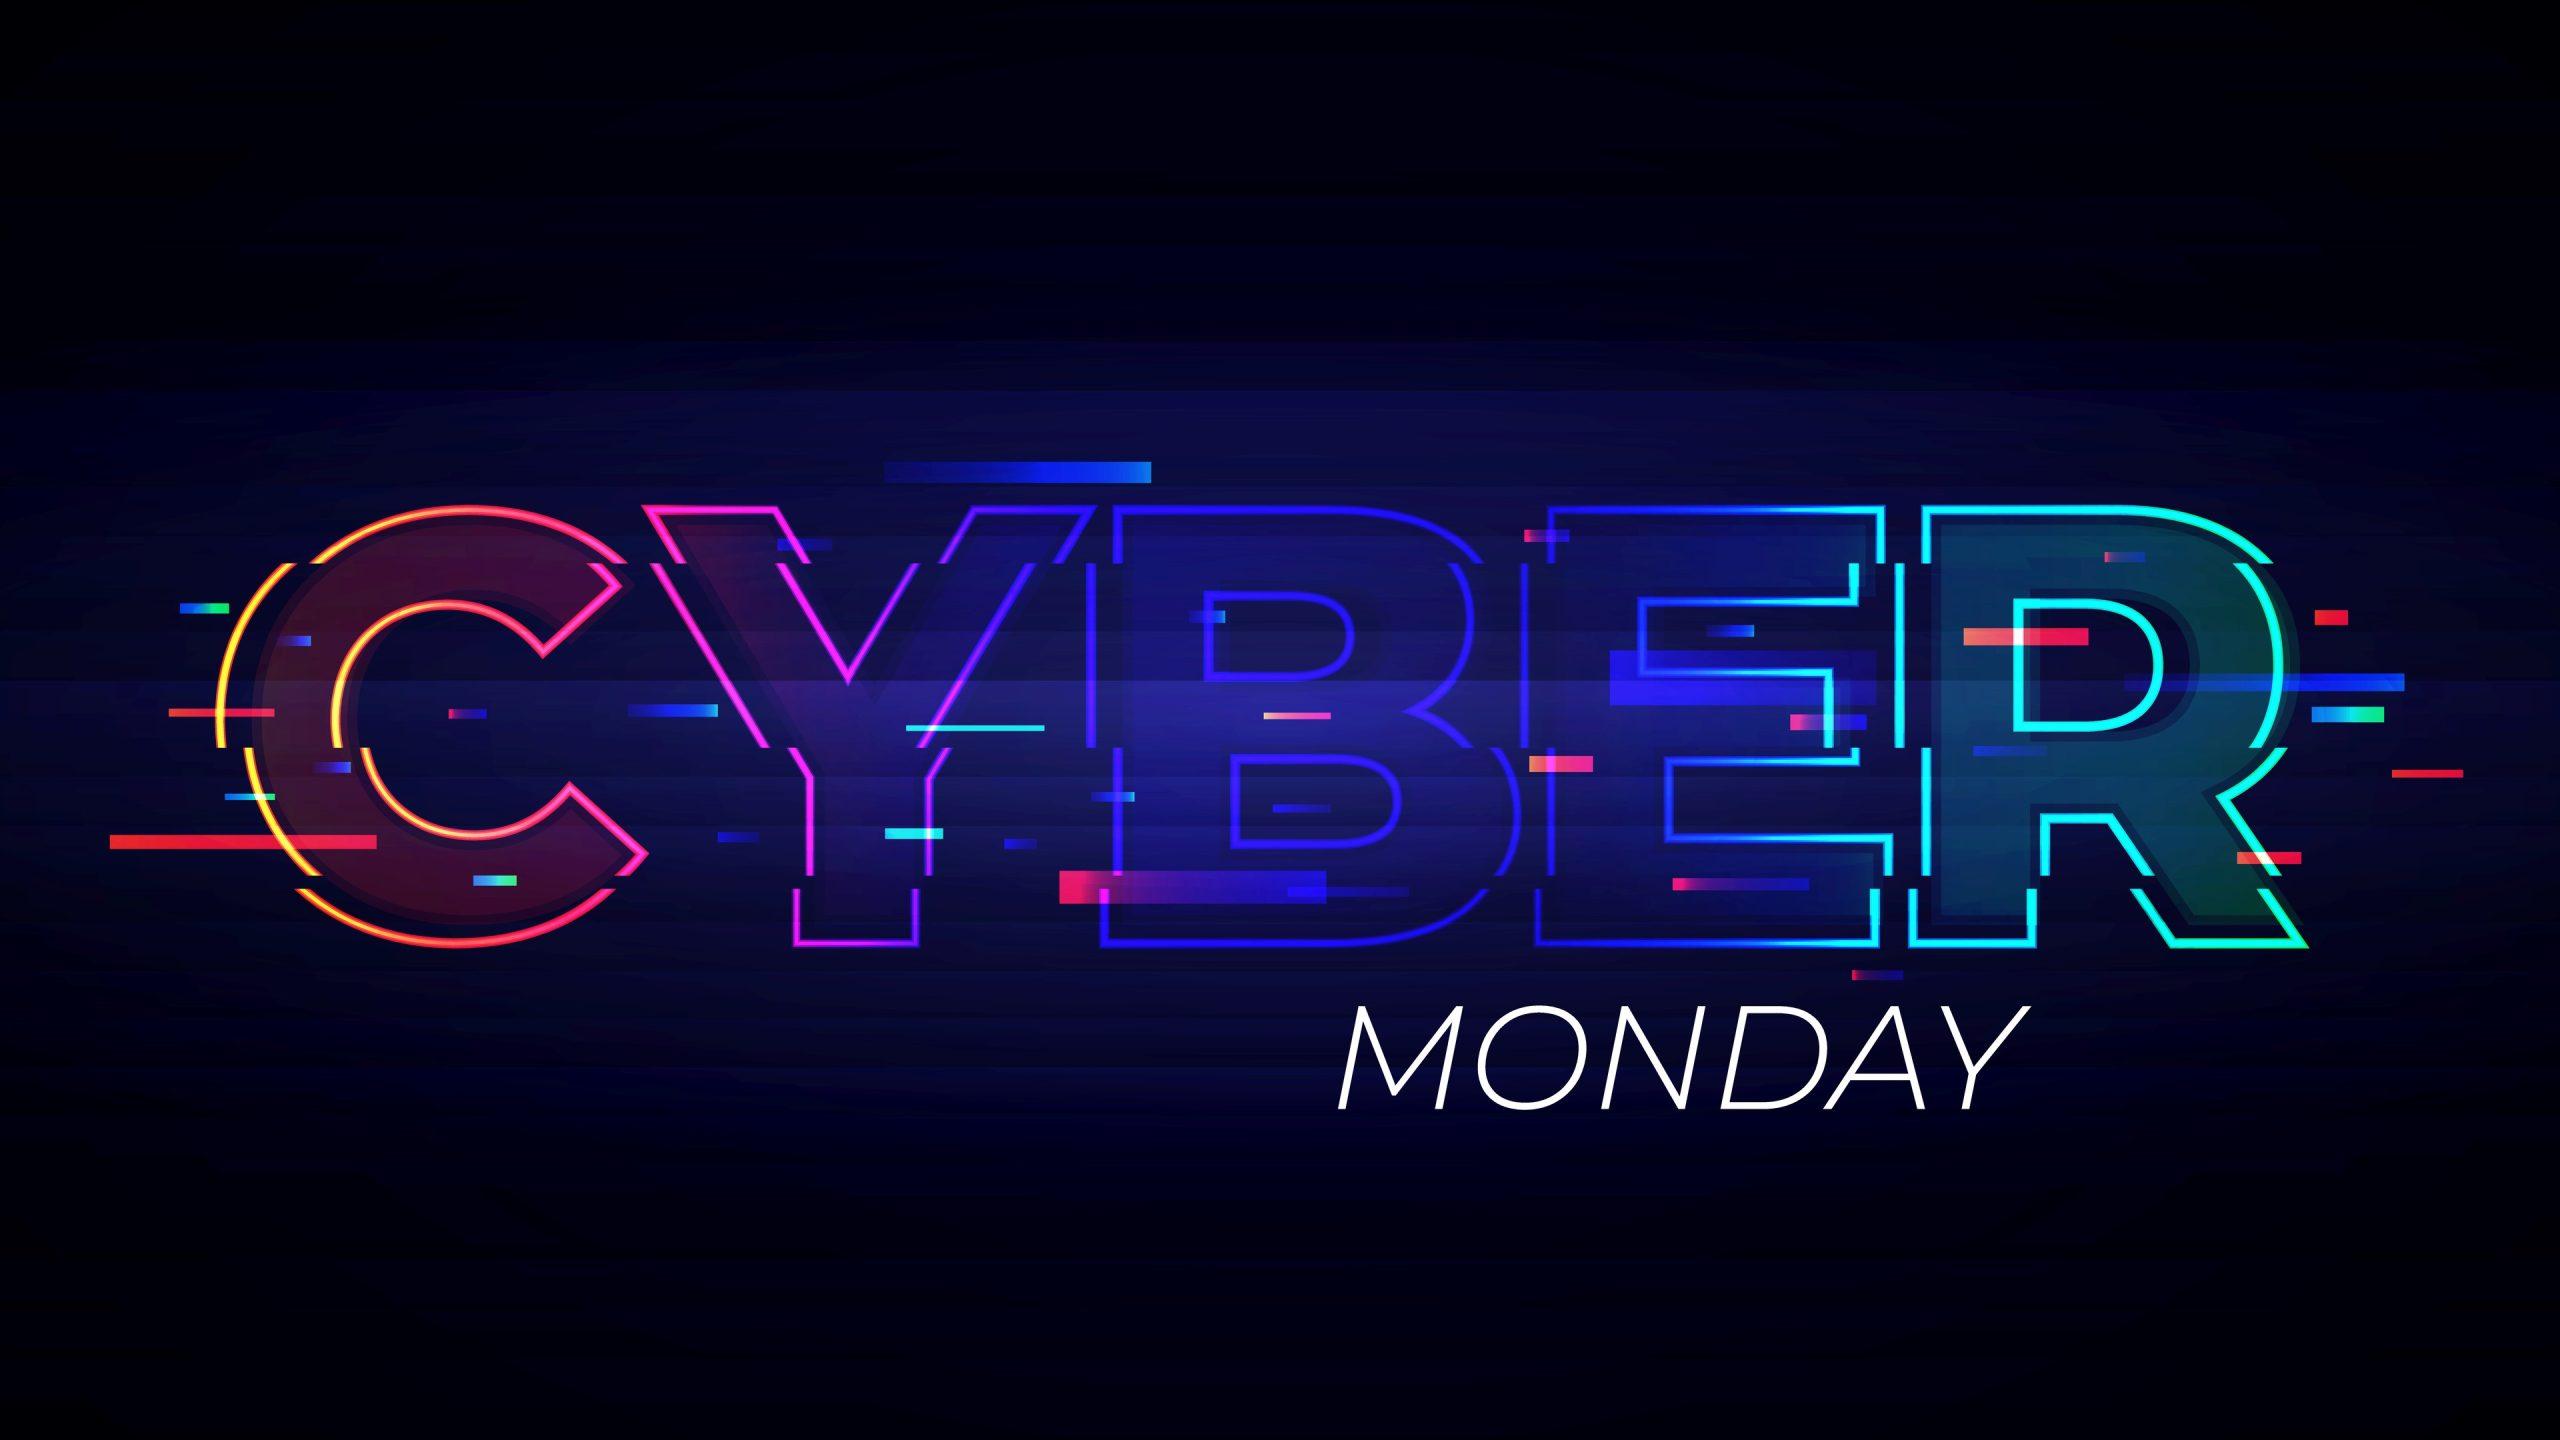 Cyber Monday: The Ultimate Online Shopping Extravaganza